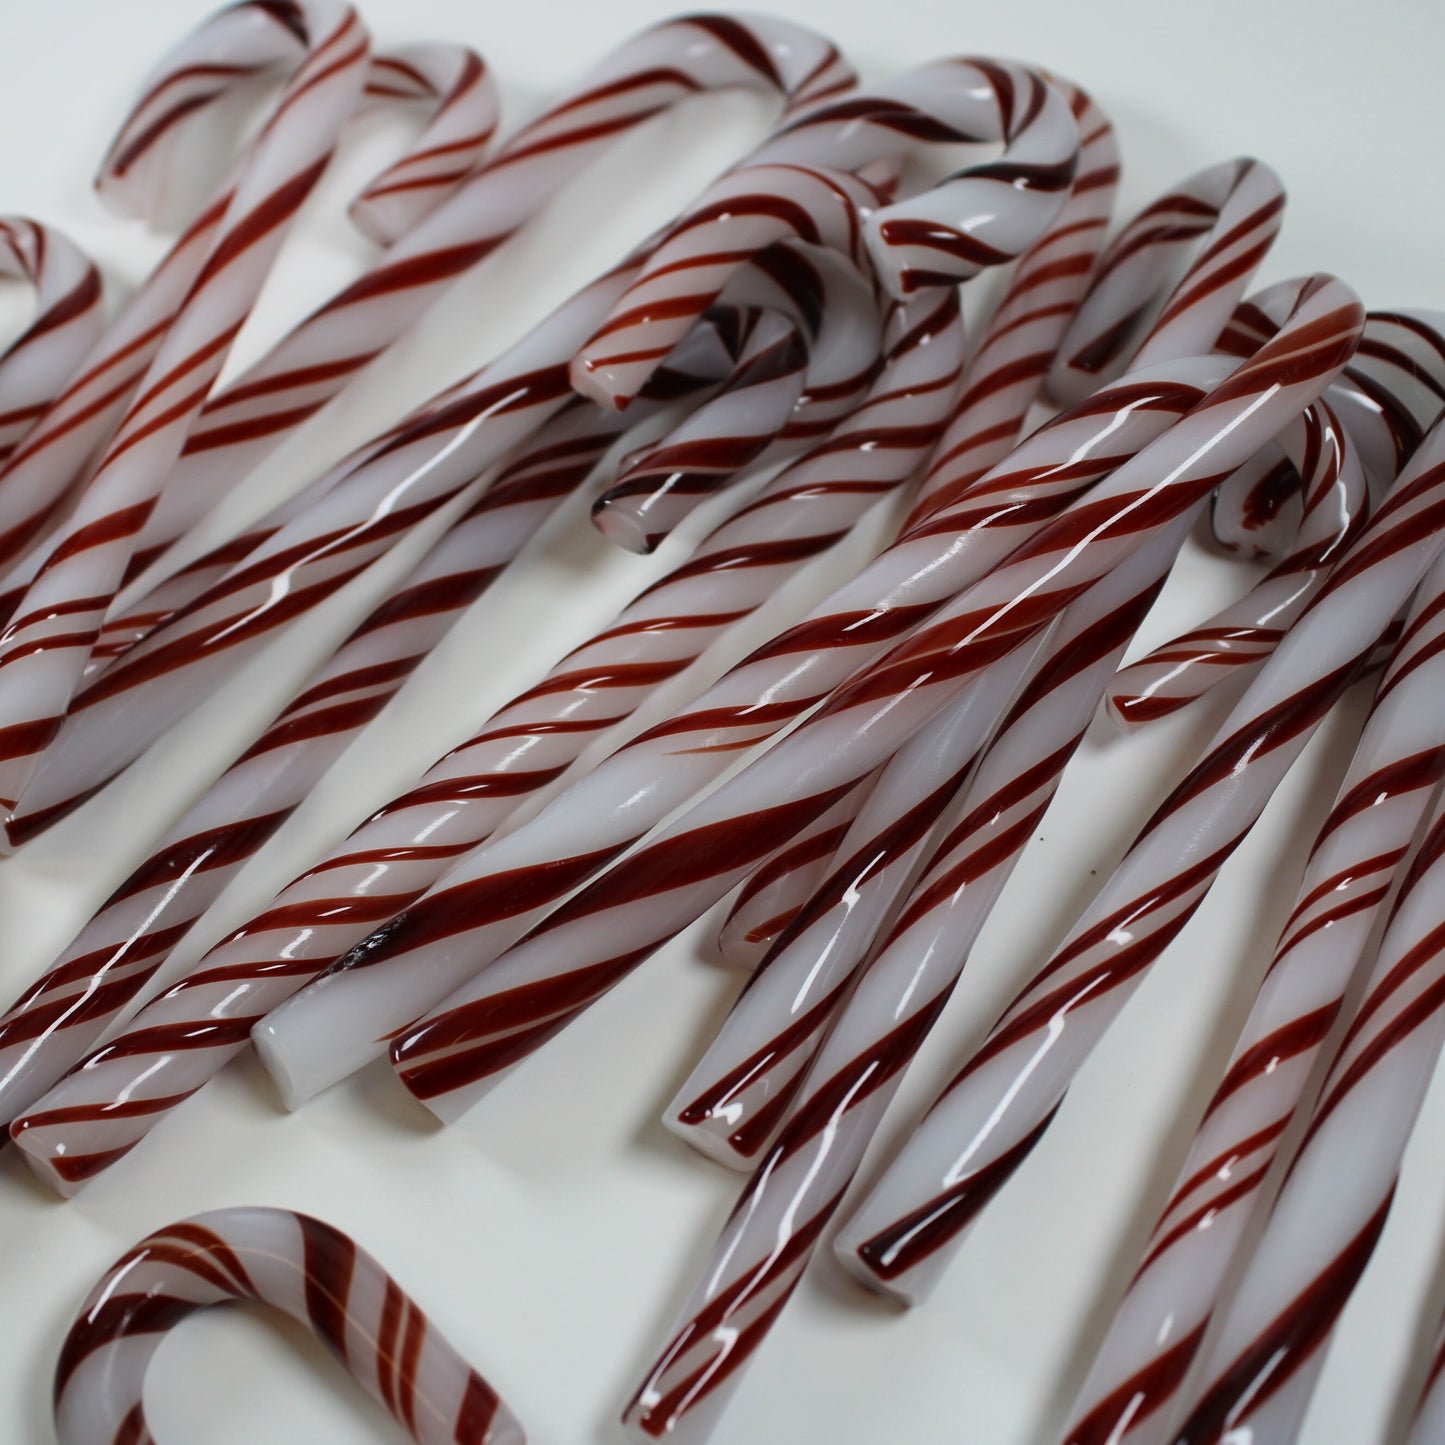 Glass Candy Canes -2 Pack- Hand Blown Glass Candy Canes w/ Gift Box Storage Box, Glass Christmas Tree Ornament, Candy Cane Ornament